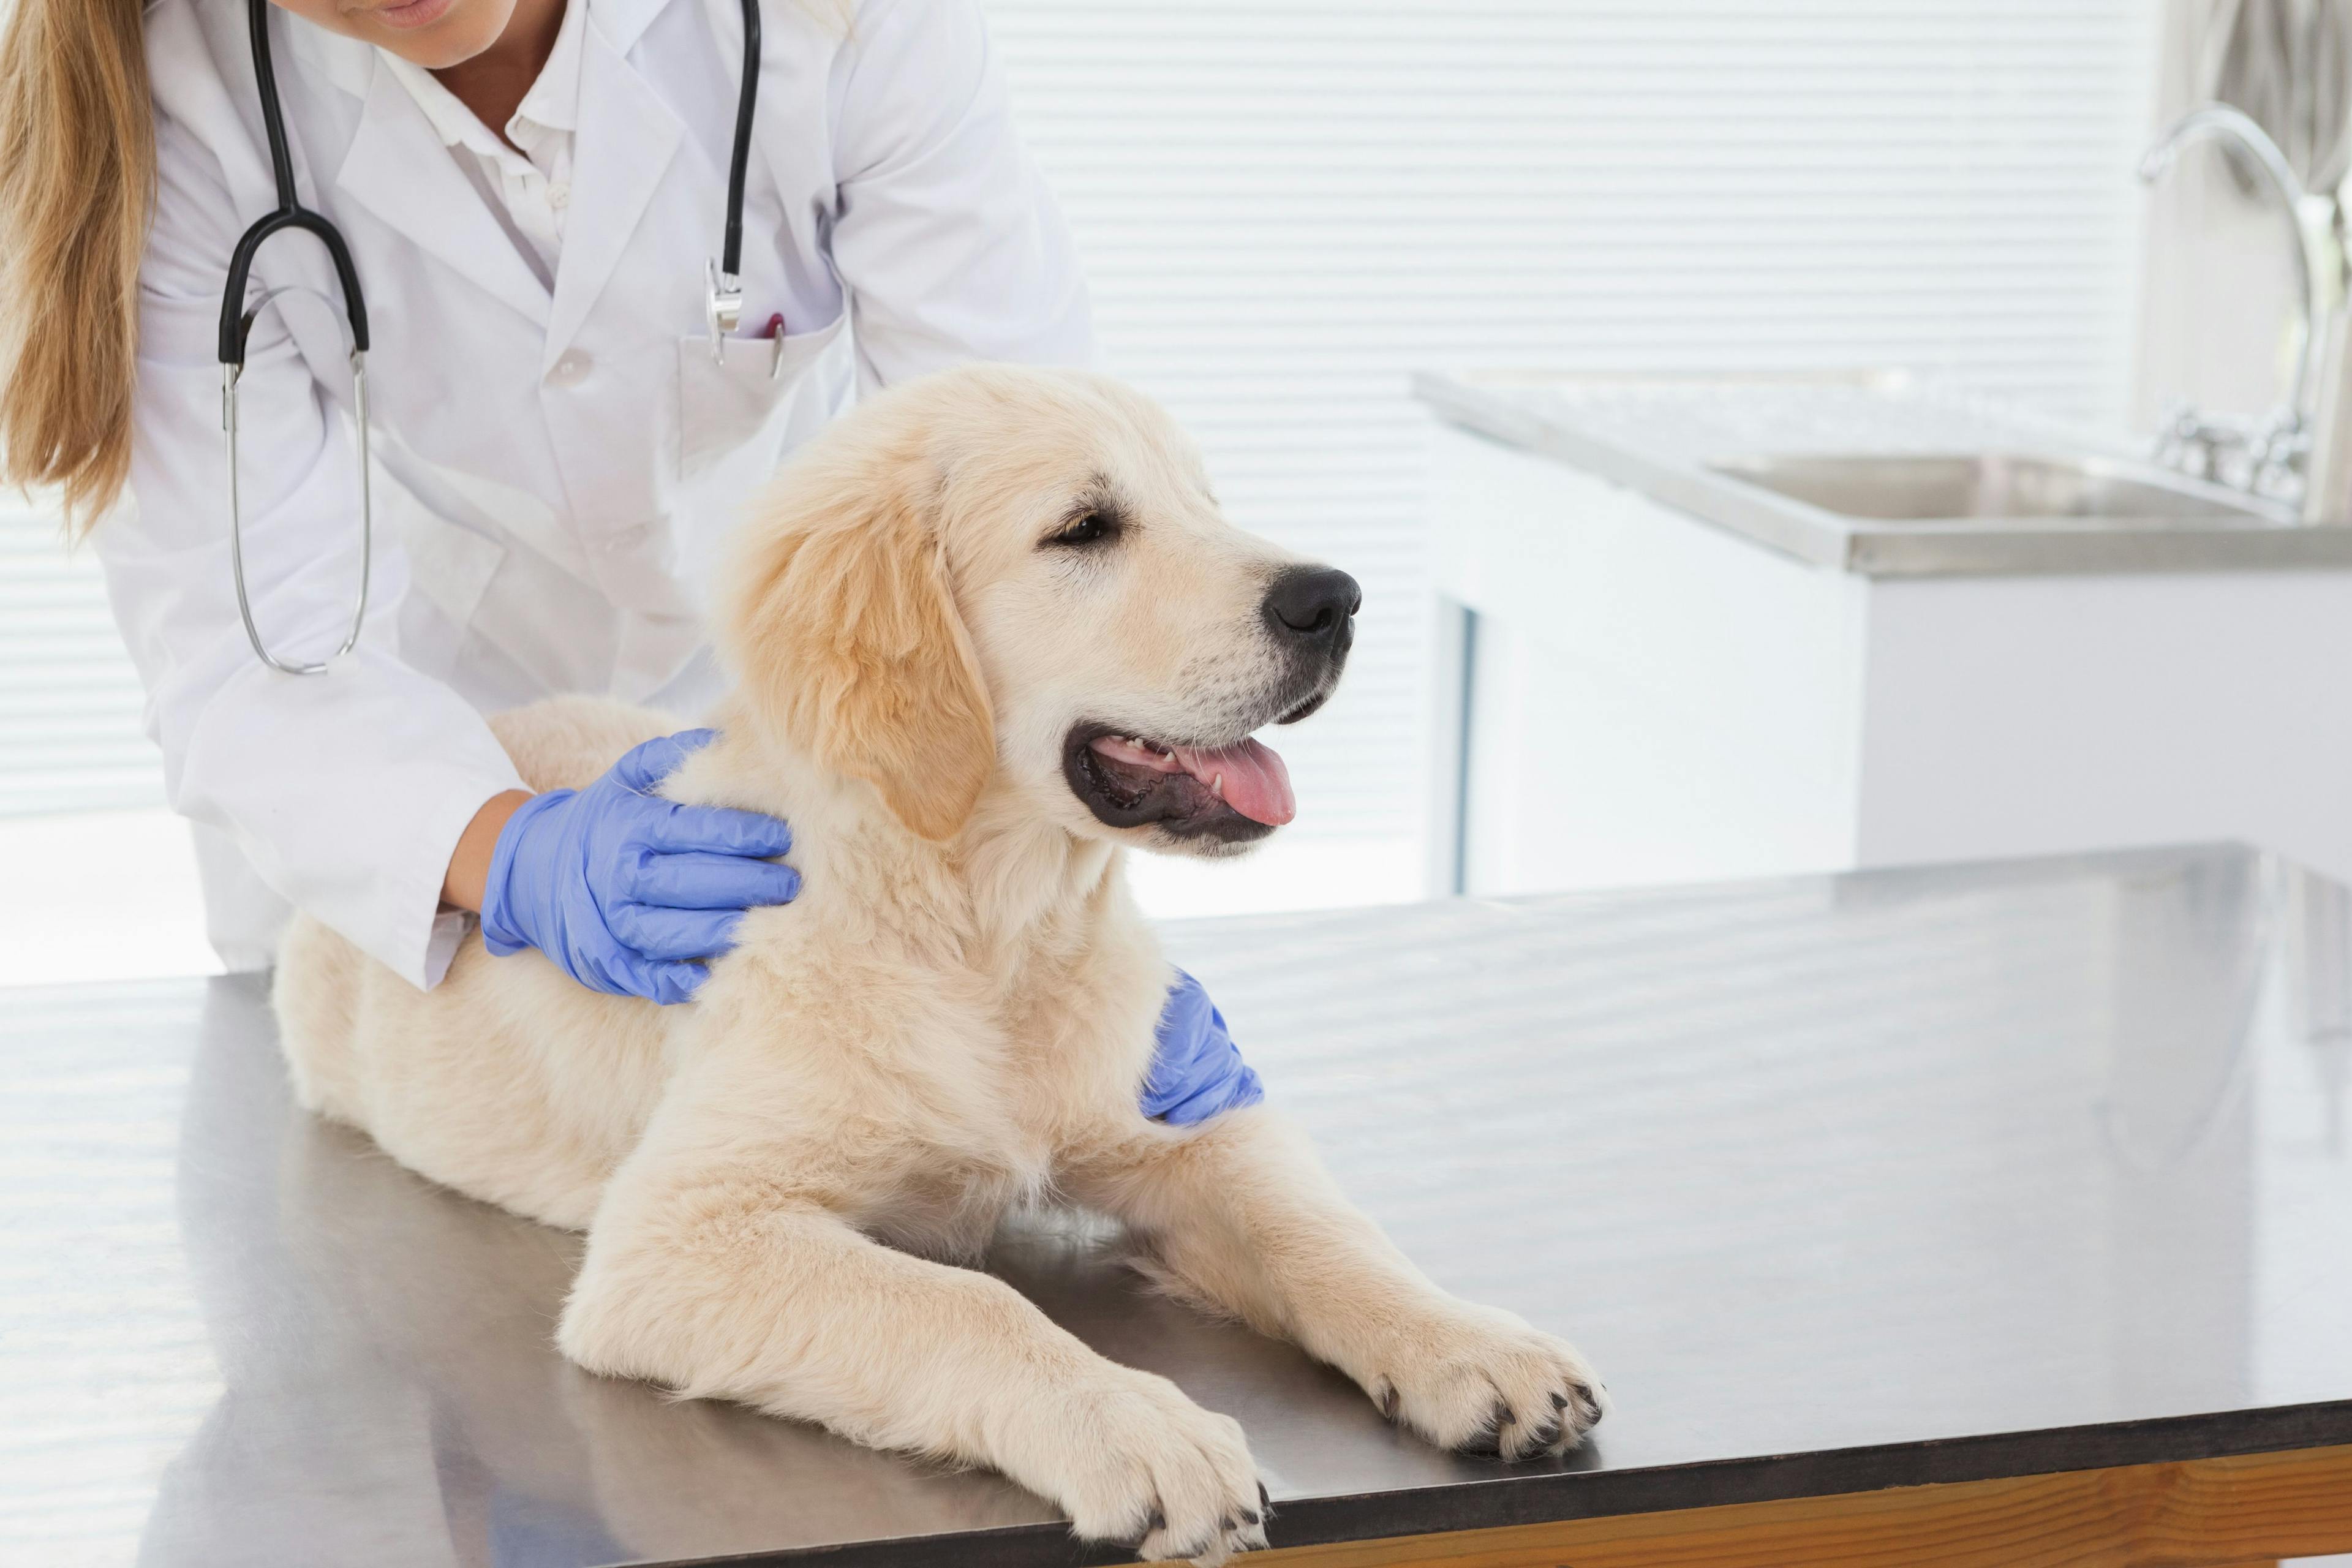 Signs and symptoms of canine tick-borne diseases